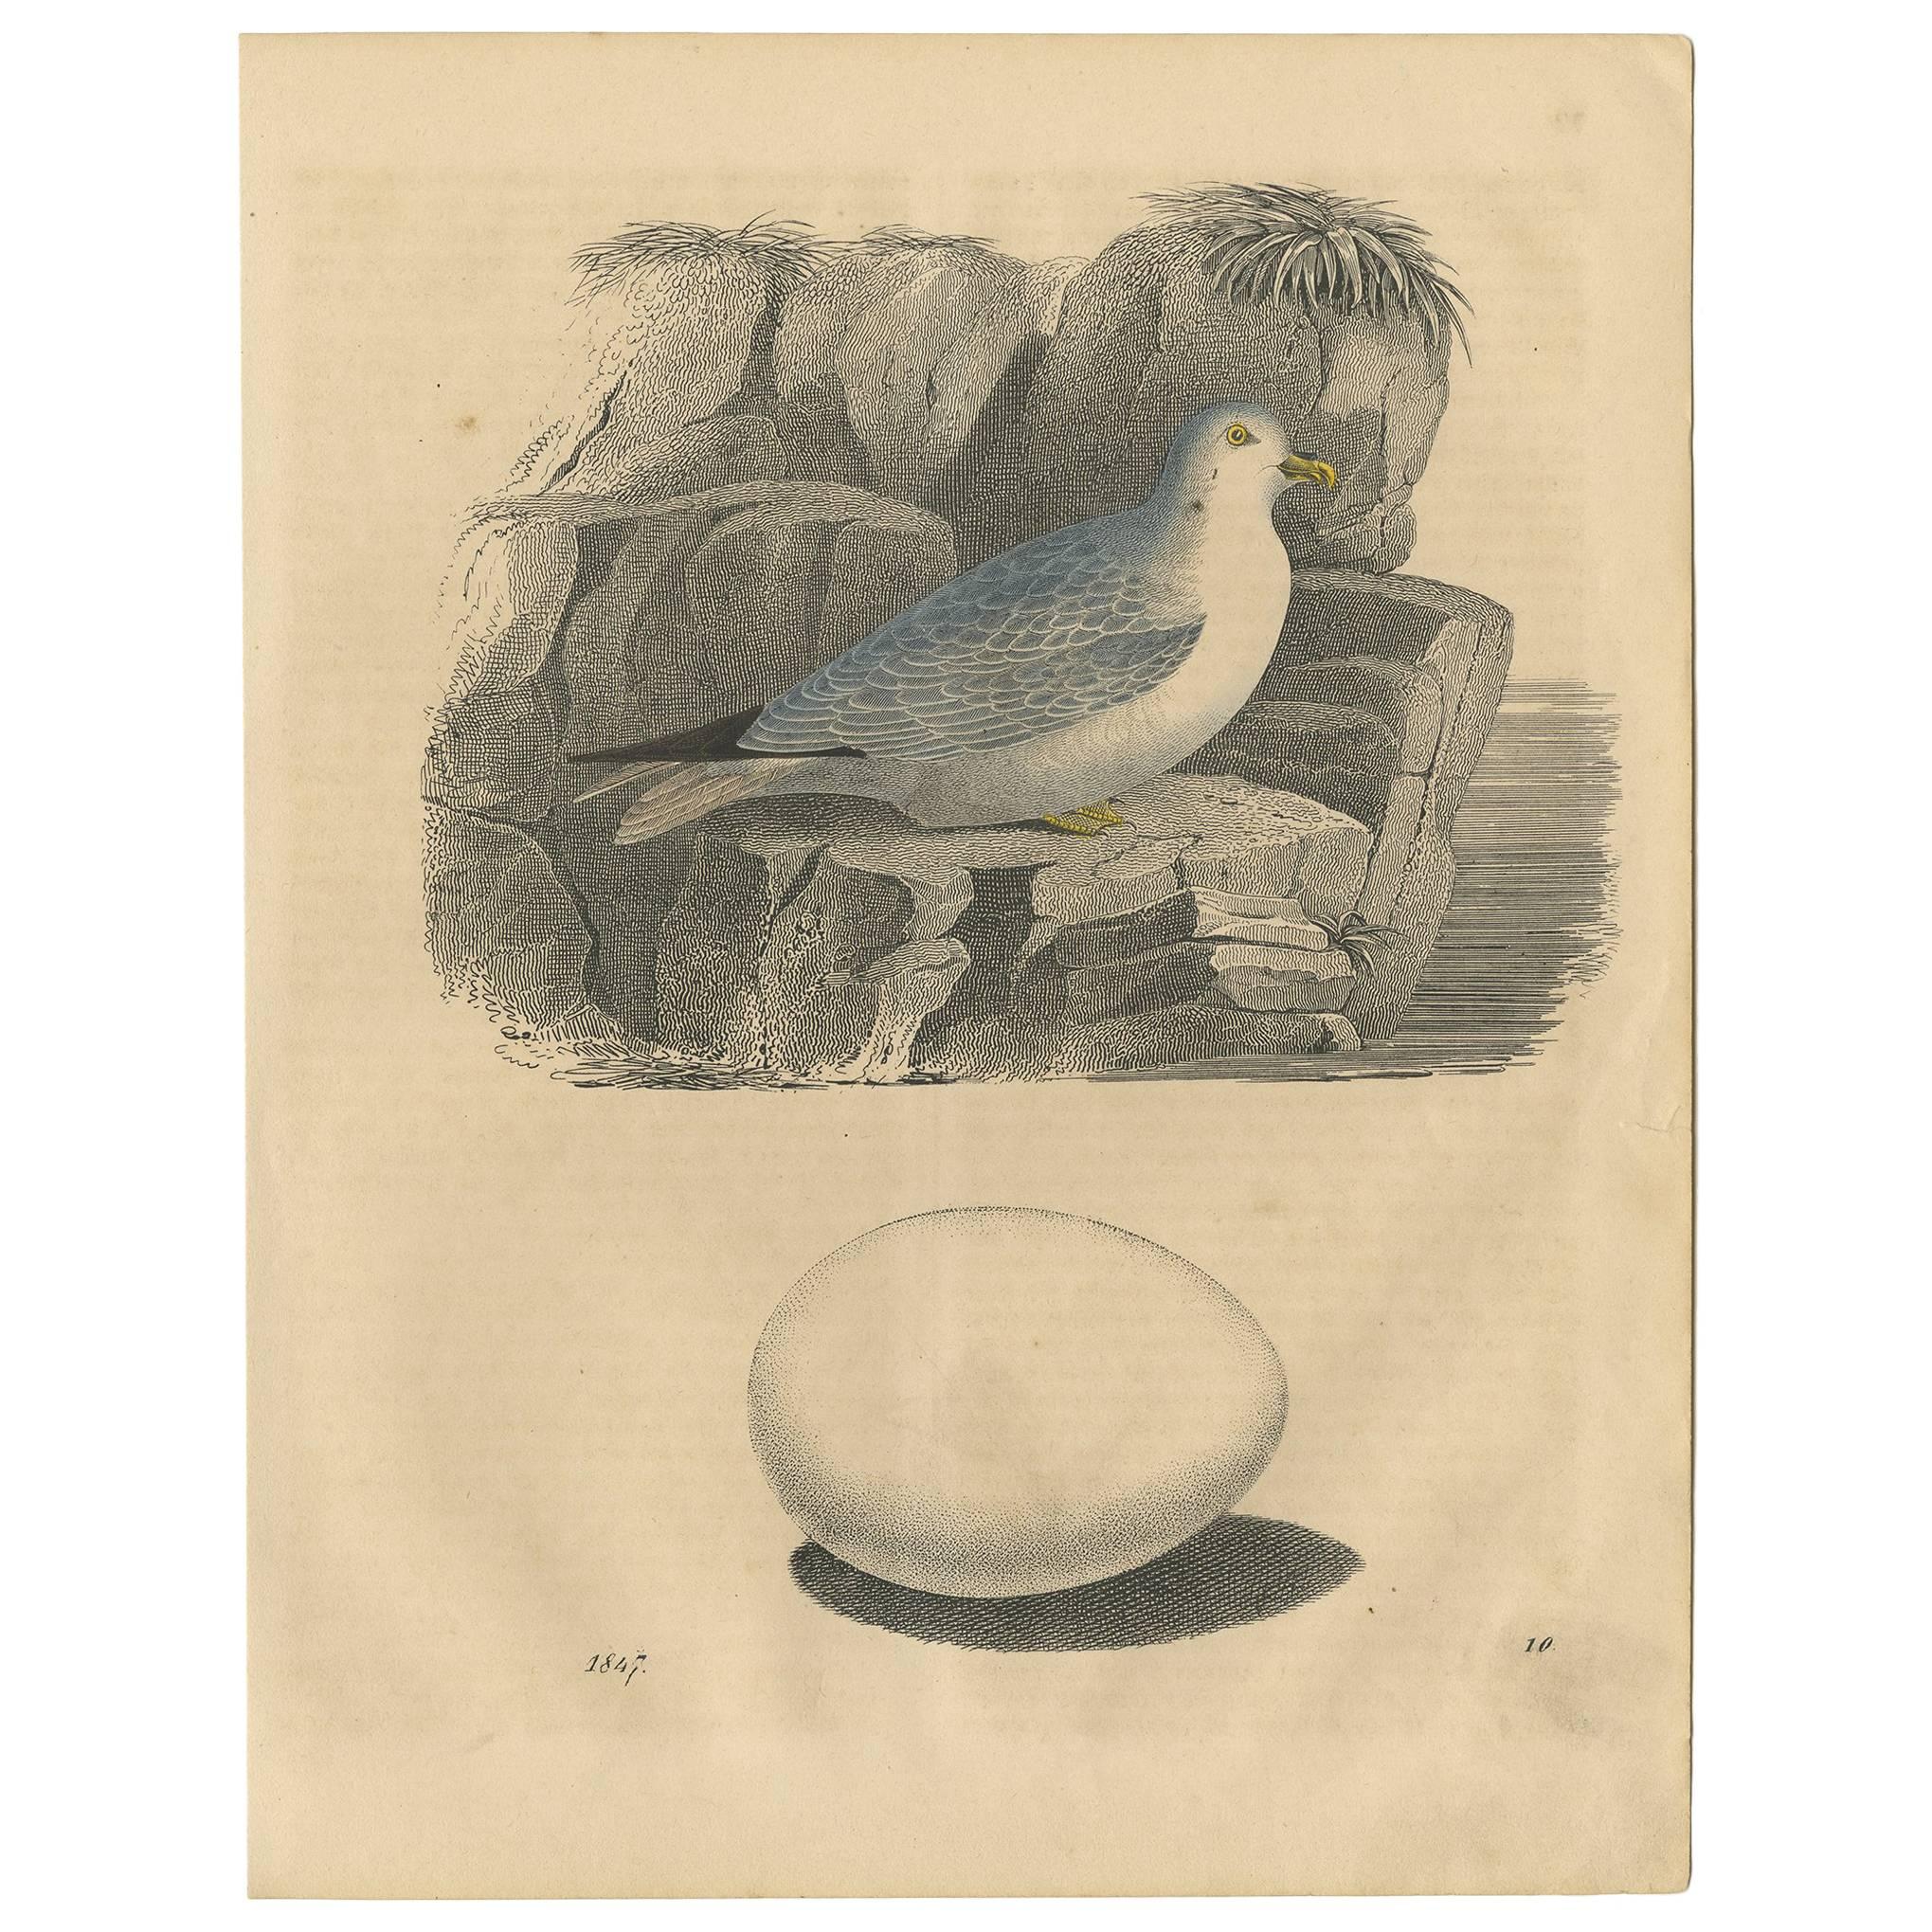 Antique Animal Print of a Gull 'Sea Birds' and Egg by C. Hoffmann, 1847 For Sale